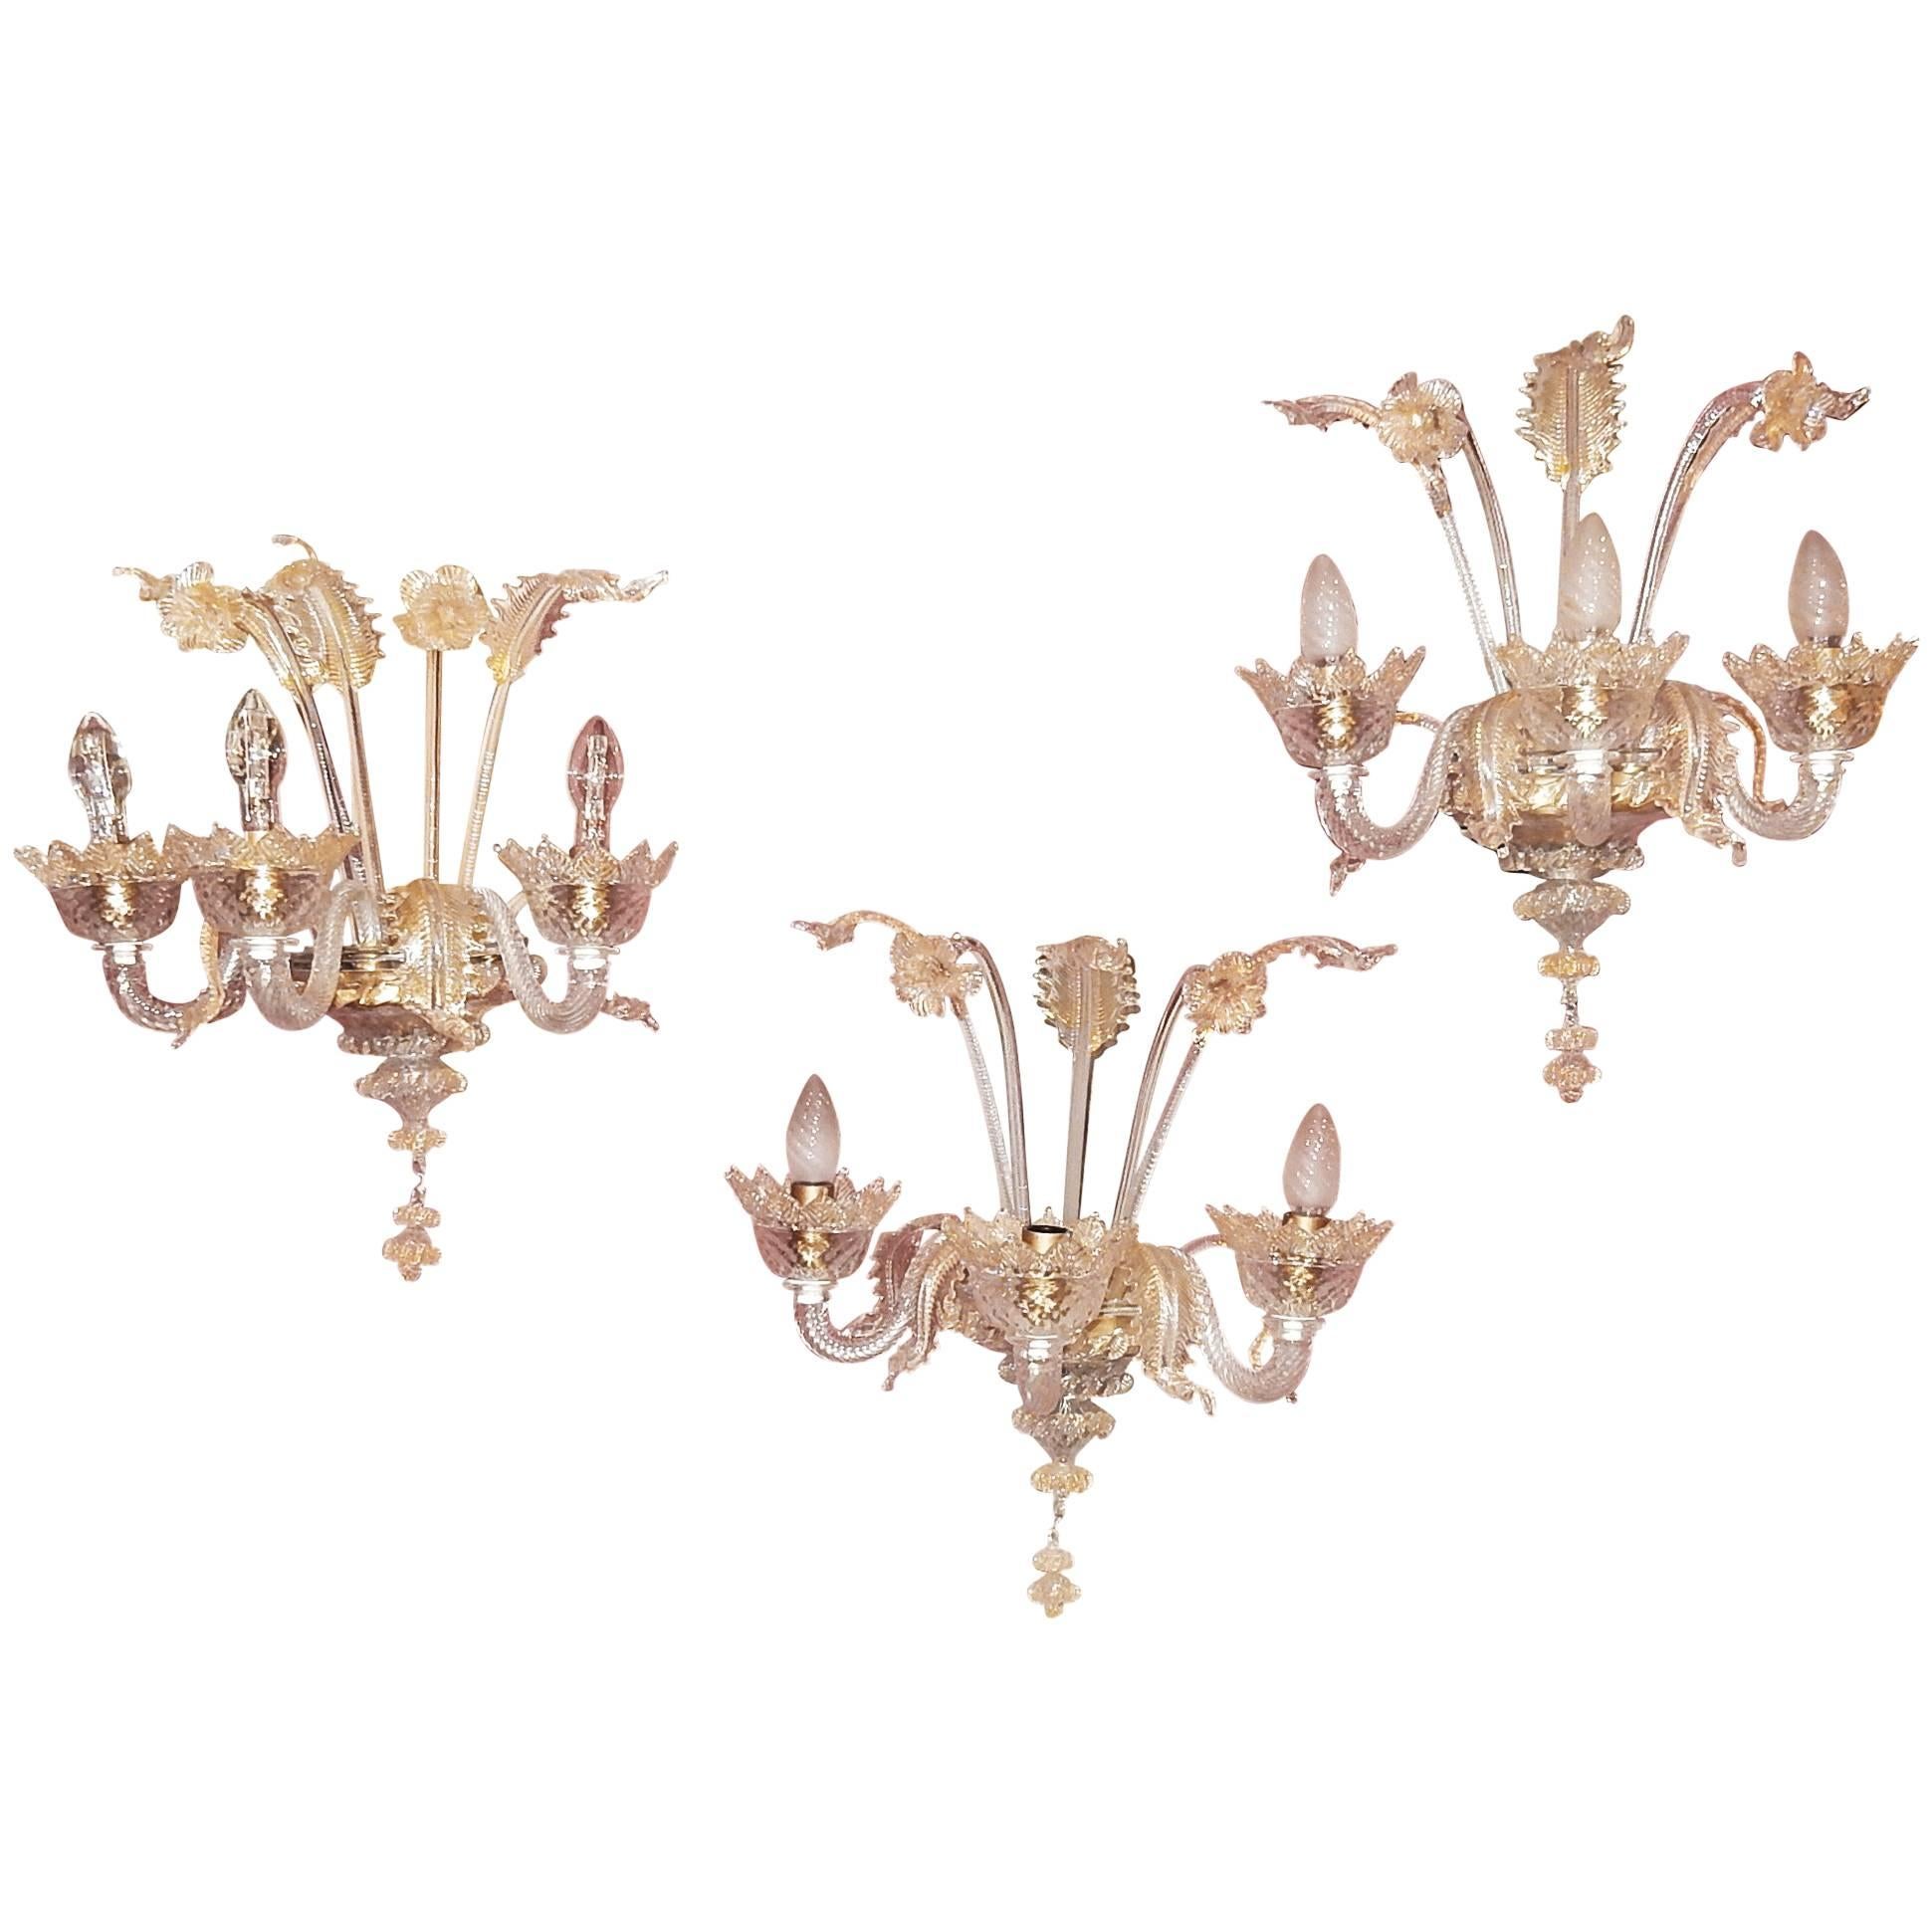 Three Wall Lamps Has Three Arms of Light, Crystal of Murano, Straws of Gold For Sale